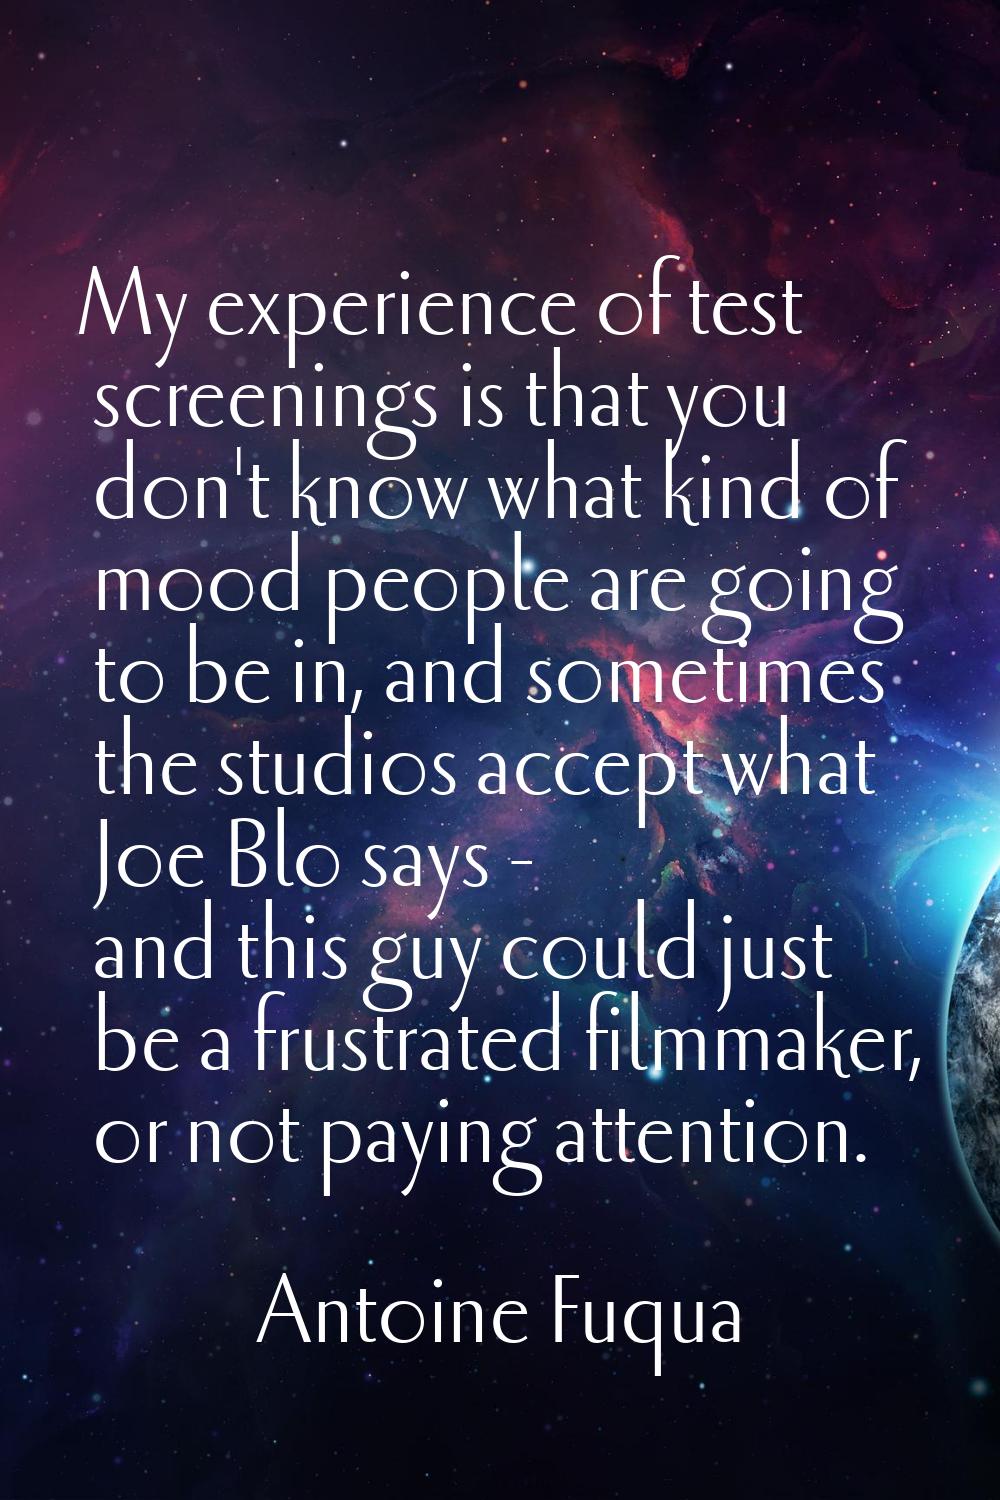 My experience of test screenings is that you don't know what kind of mood people are going to be in